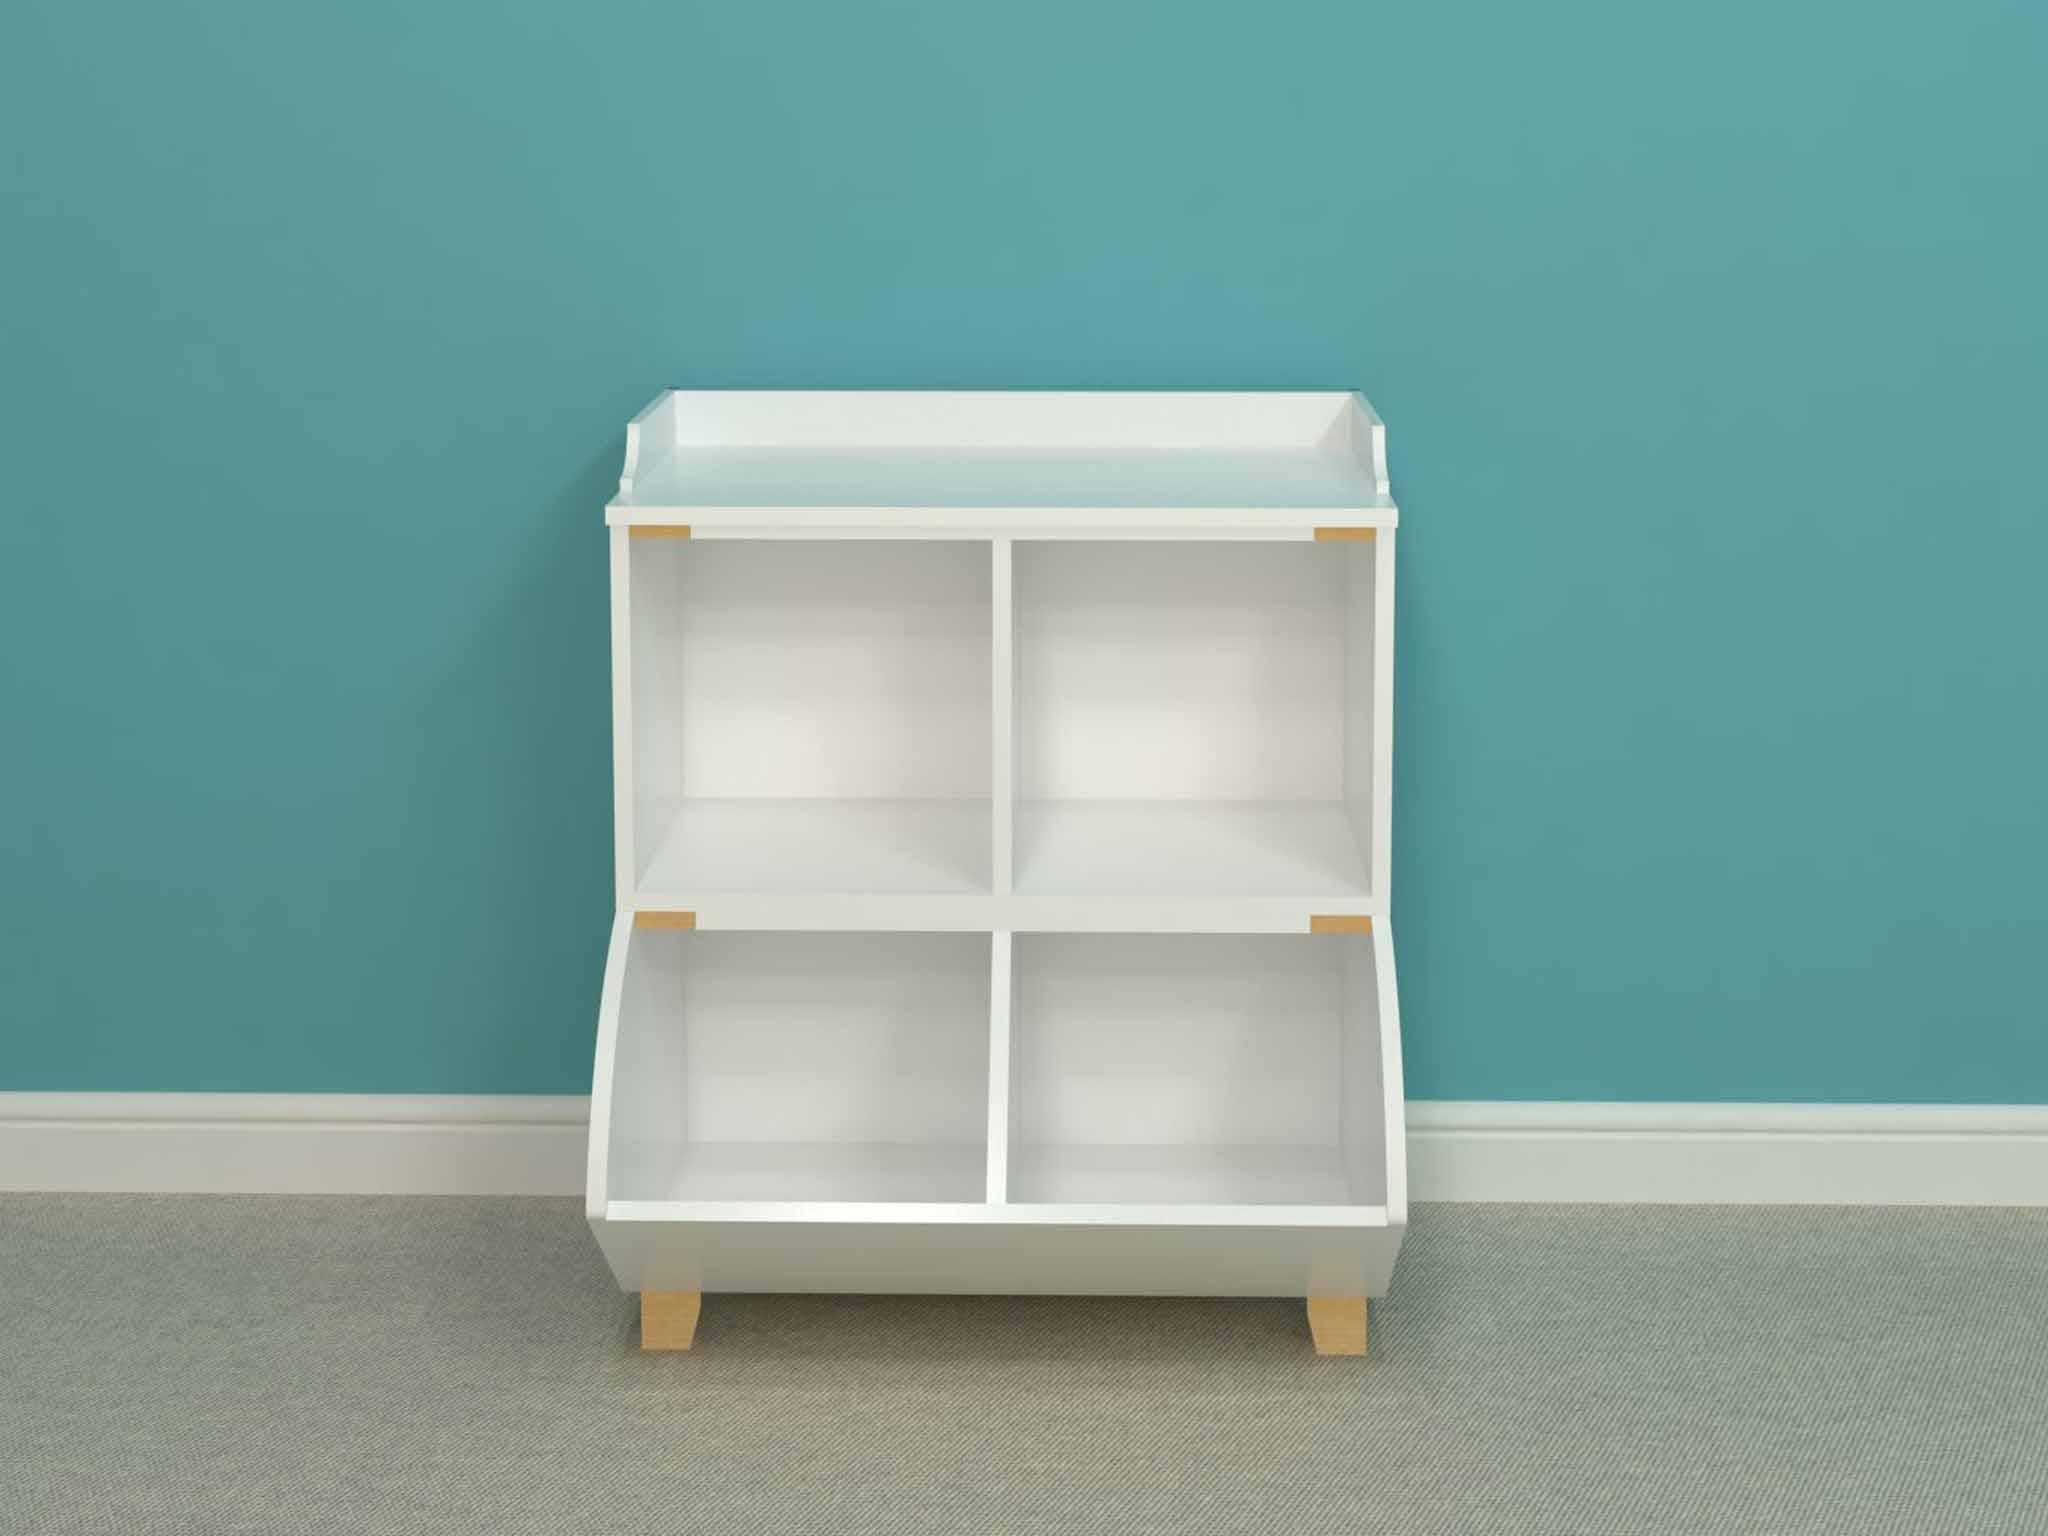 Best Toy Storage Ideas To Keep Your Kids Playroom Tidy